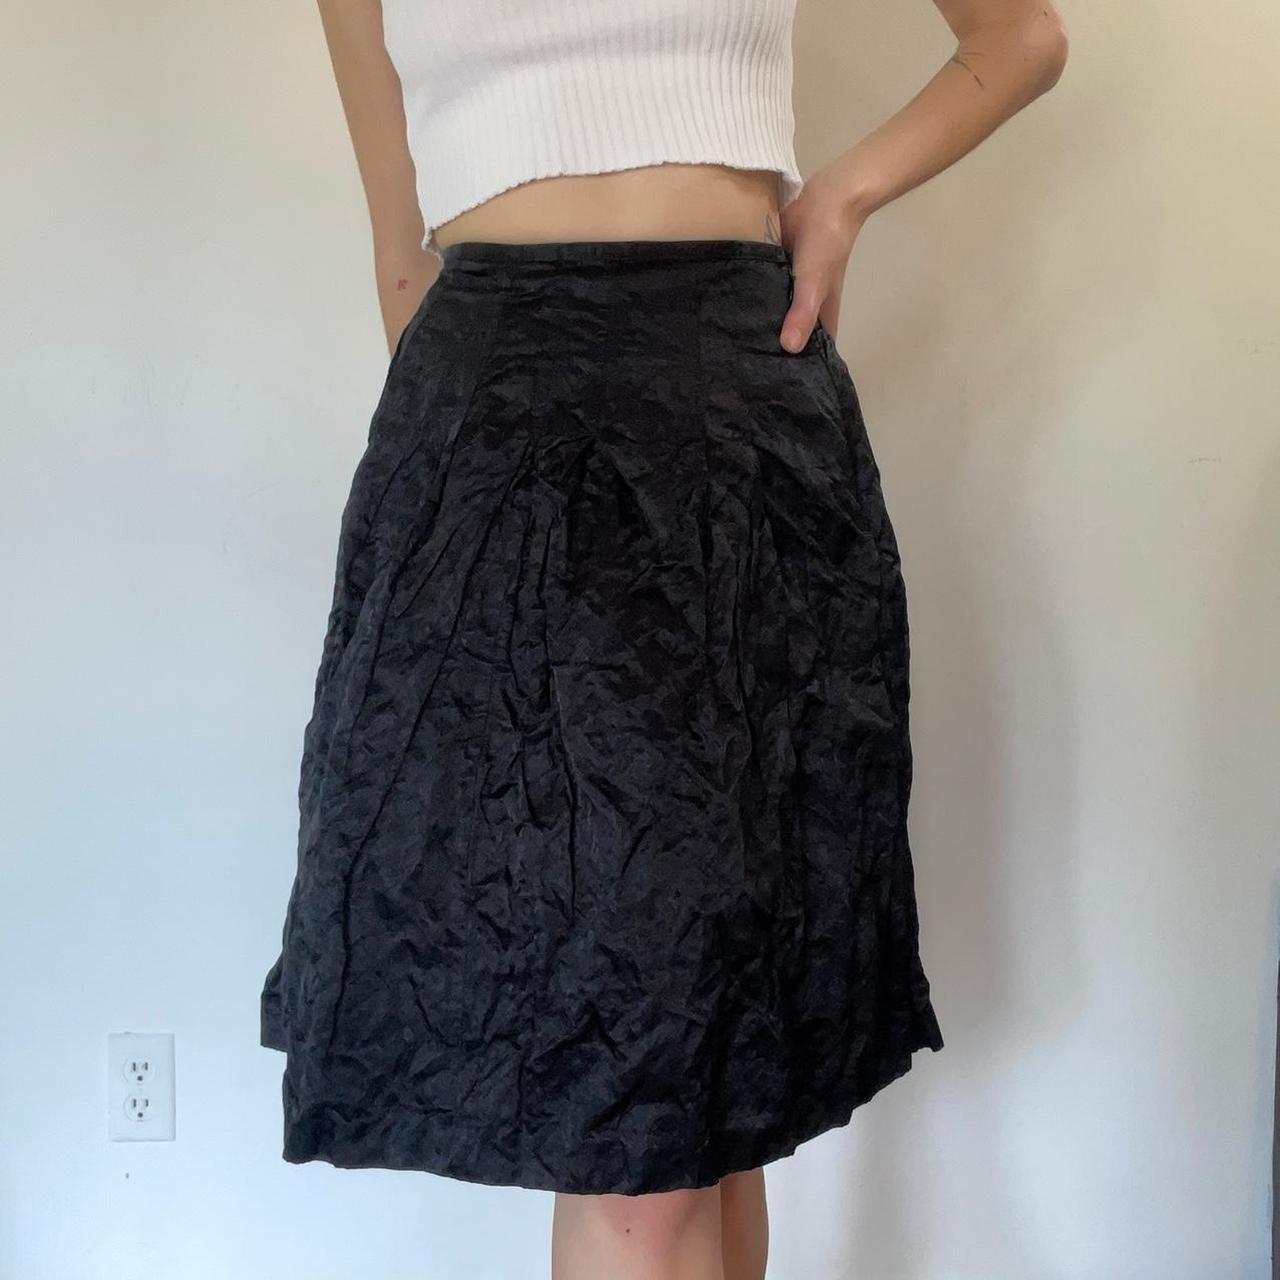 Product Image 1 - Jigsaw wrinkle skirt. Supposed to